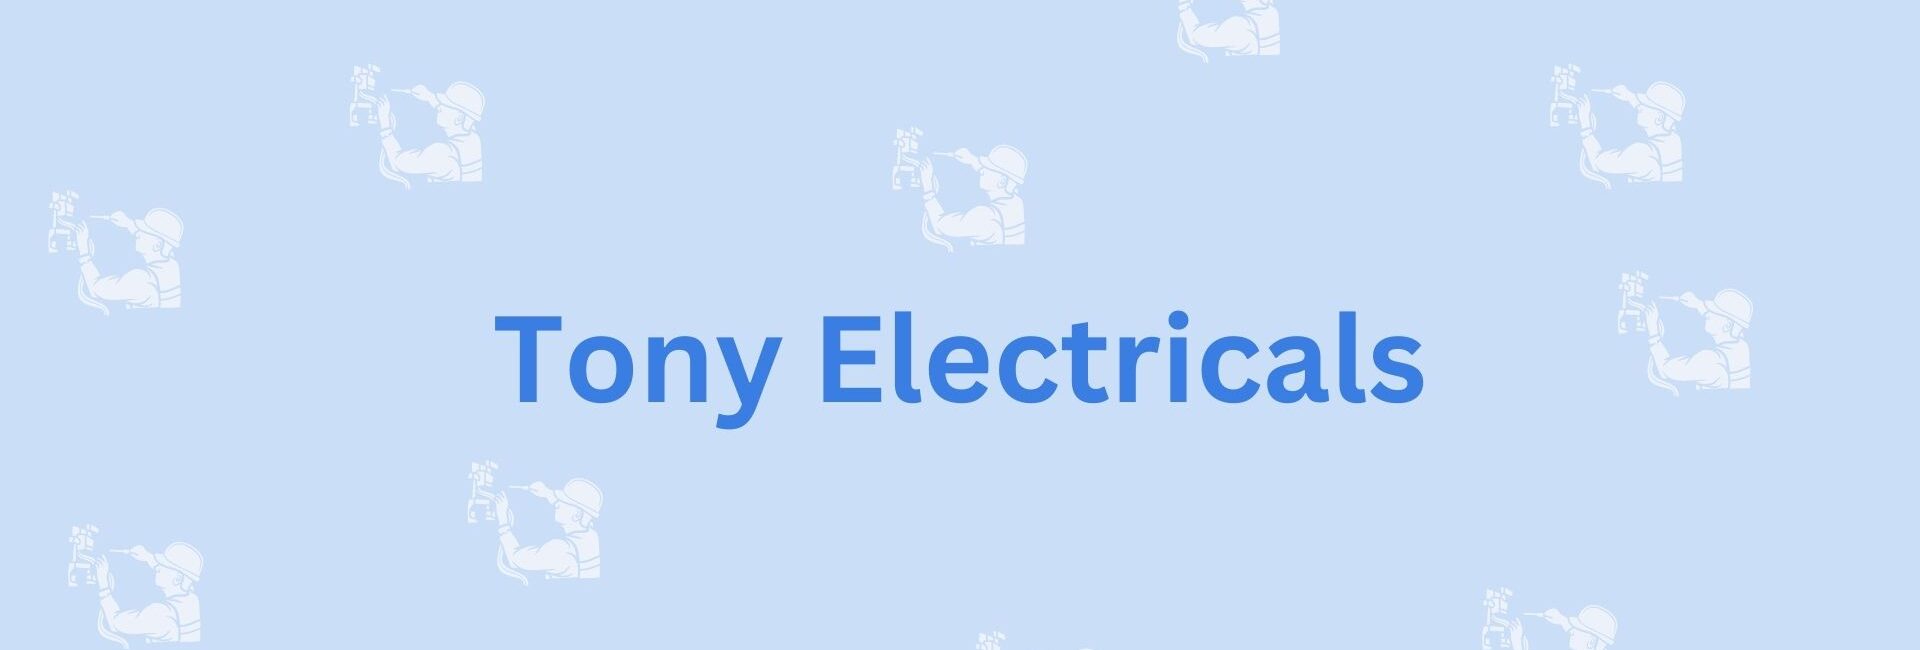 Tony Electricals- Noida's Electrician Service Provider